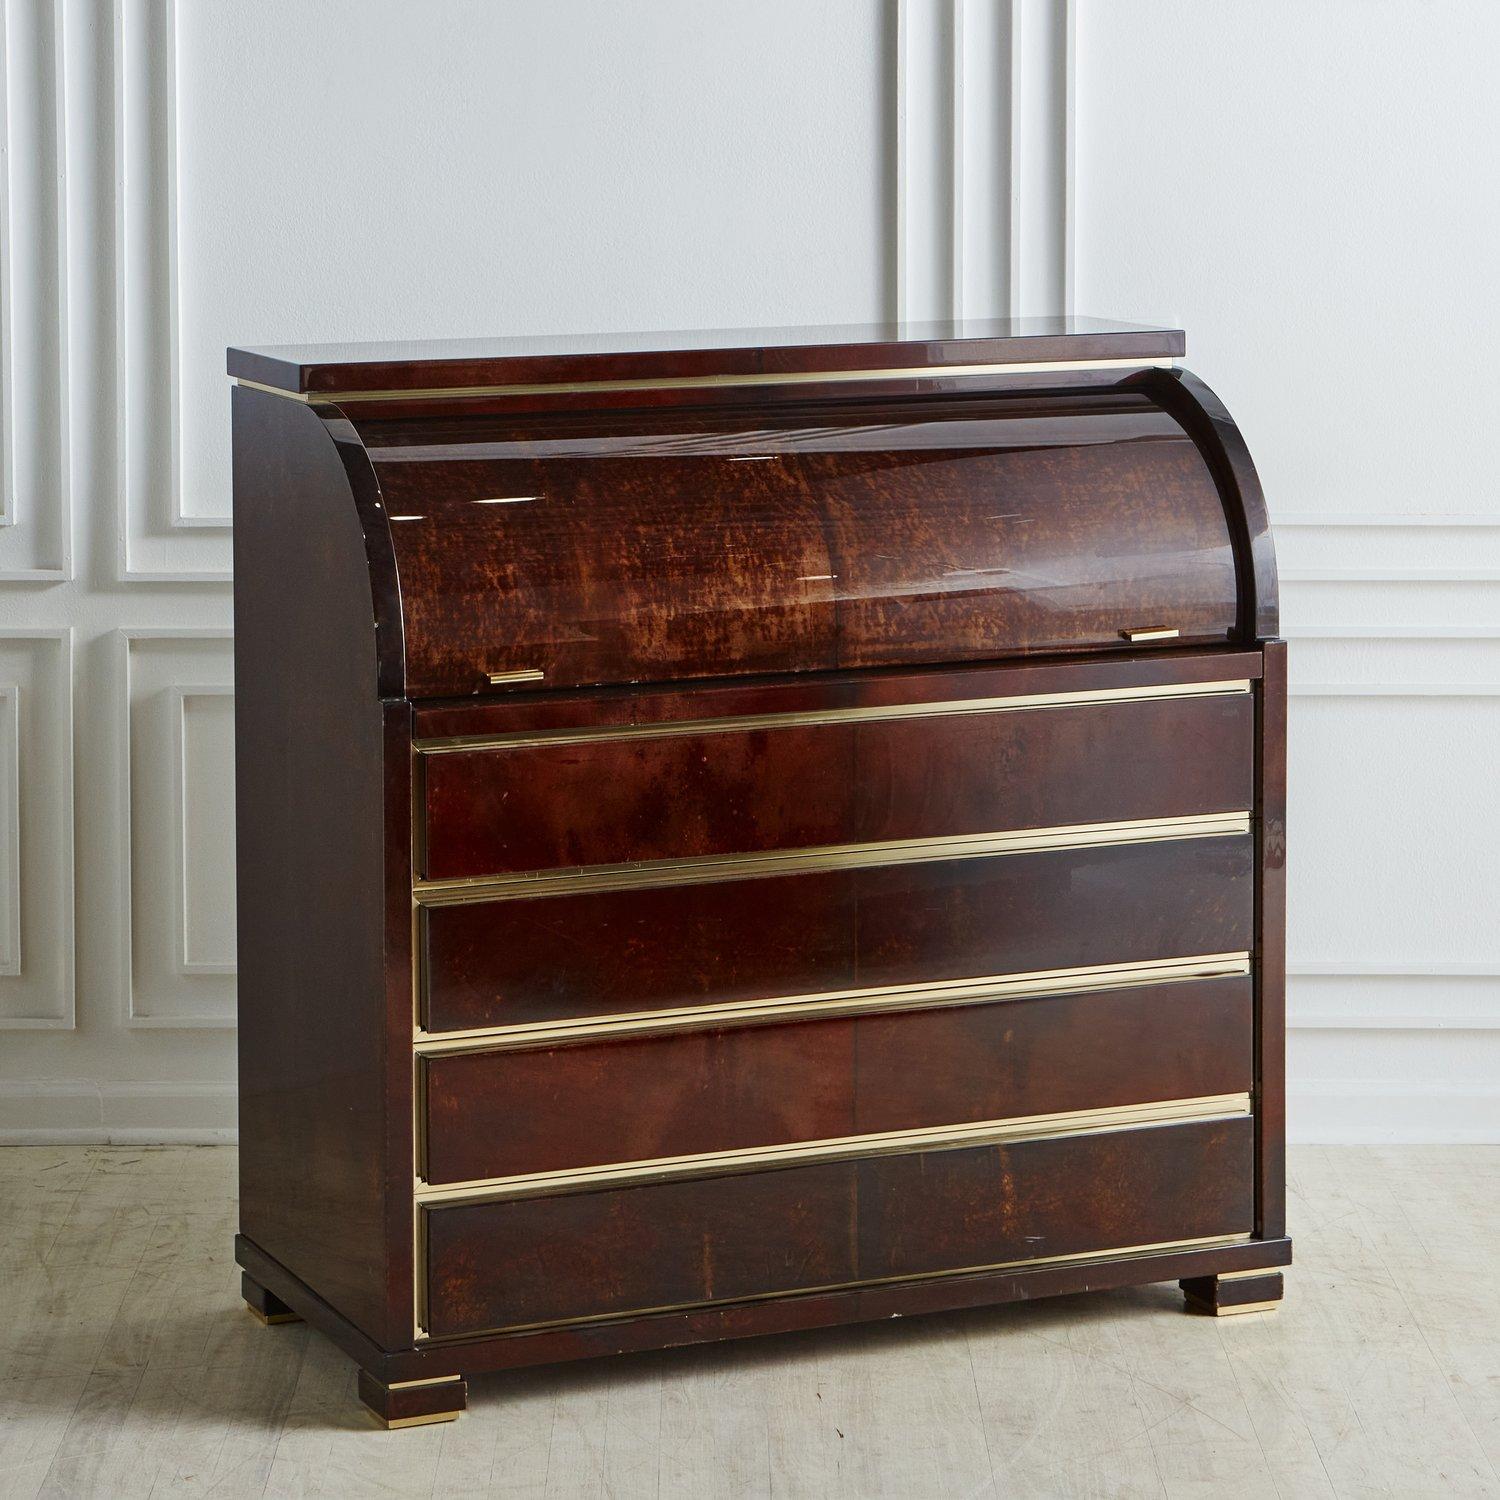 A stunning Italian secretary desk in the style of Aldo Tura. This desk features a lacquered parchment finish in a deep brown hue with subtle color variations. Based on the 18th century escritoire, this Mid Century beauty has a curved retractable top